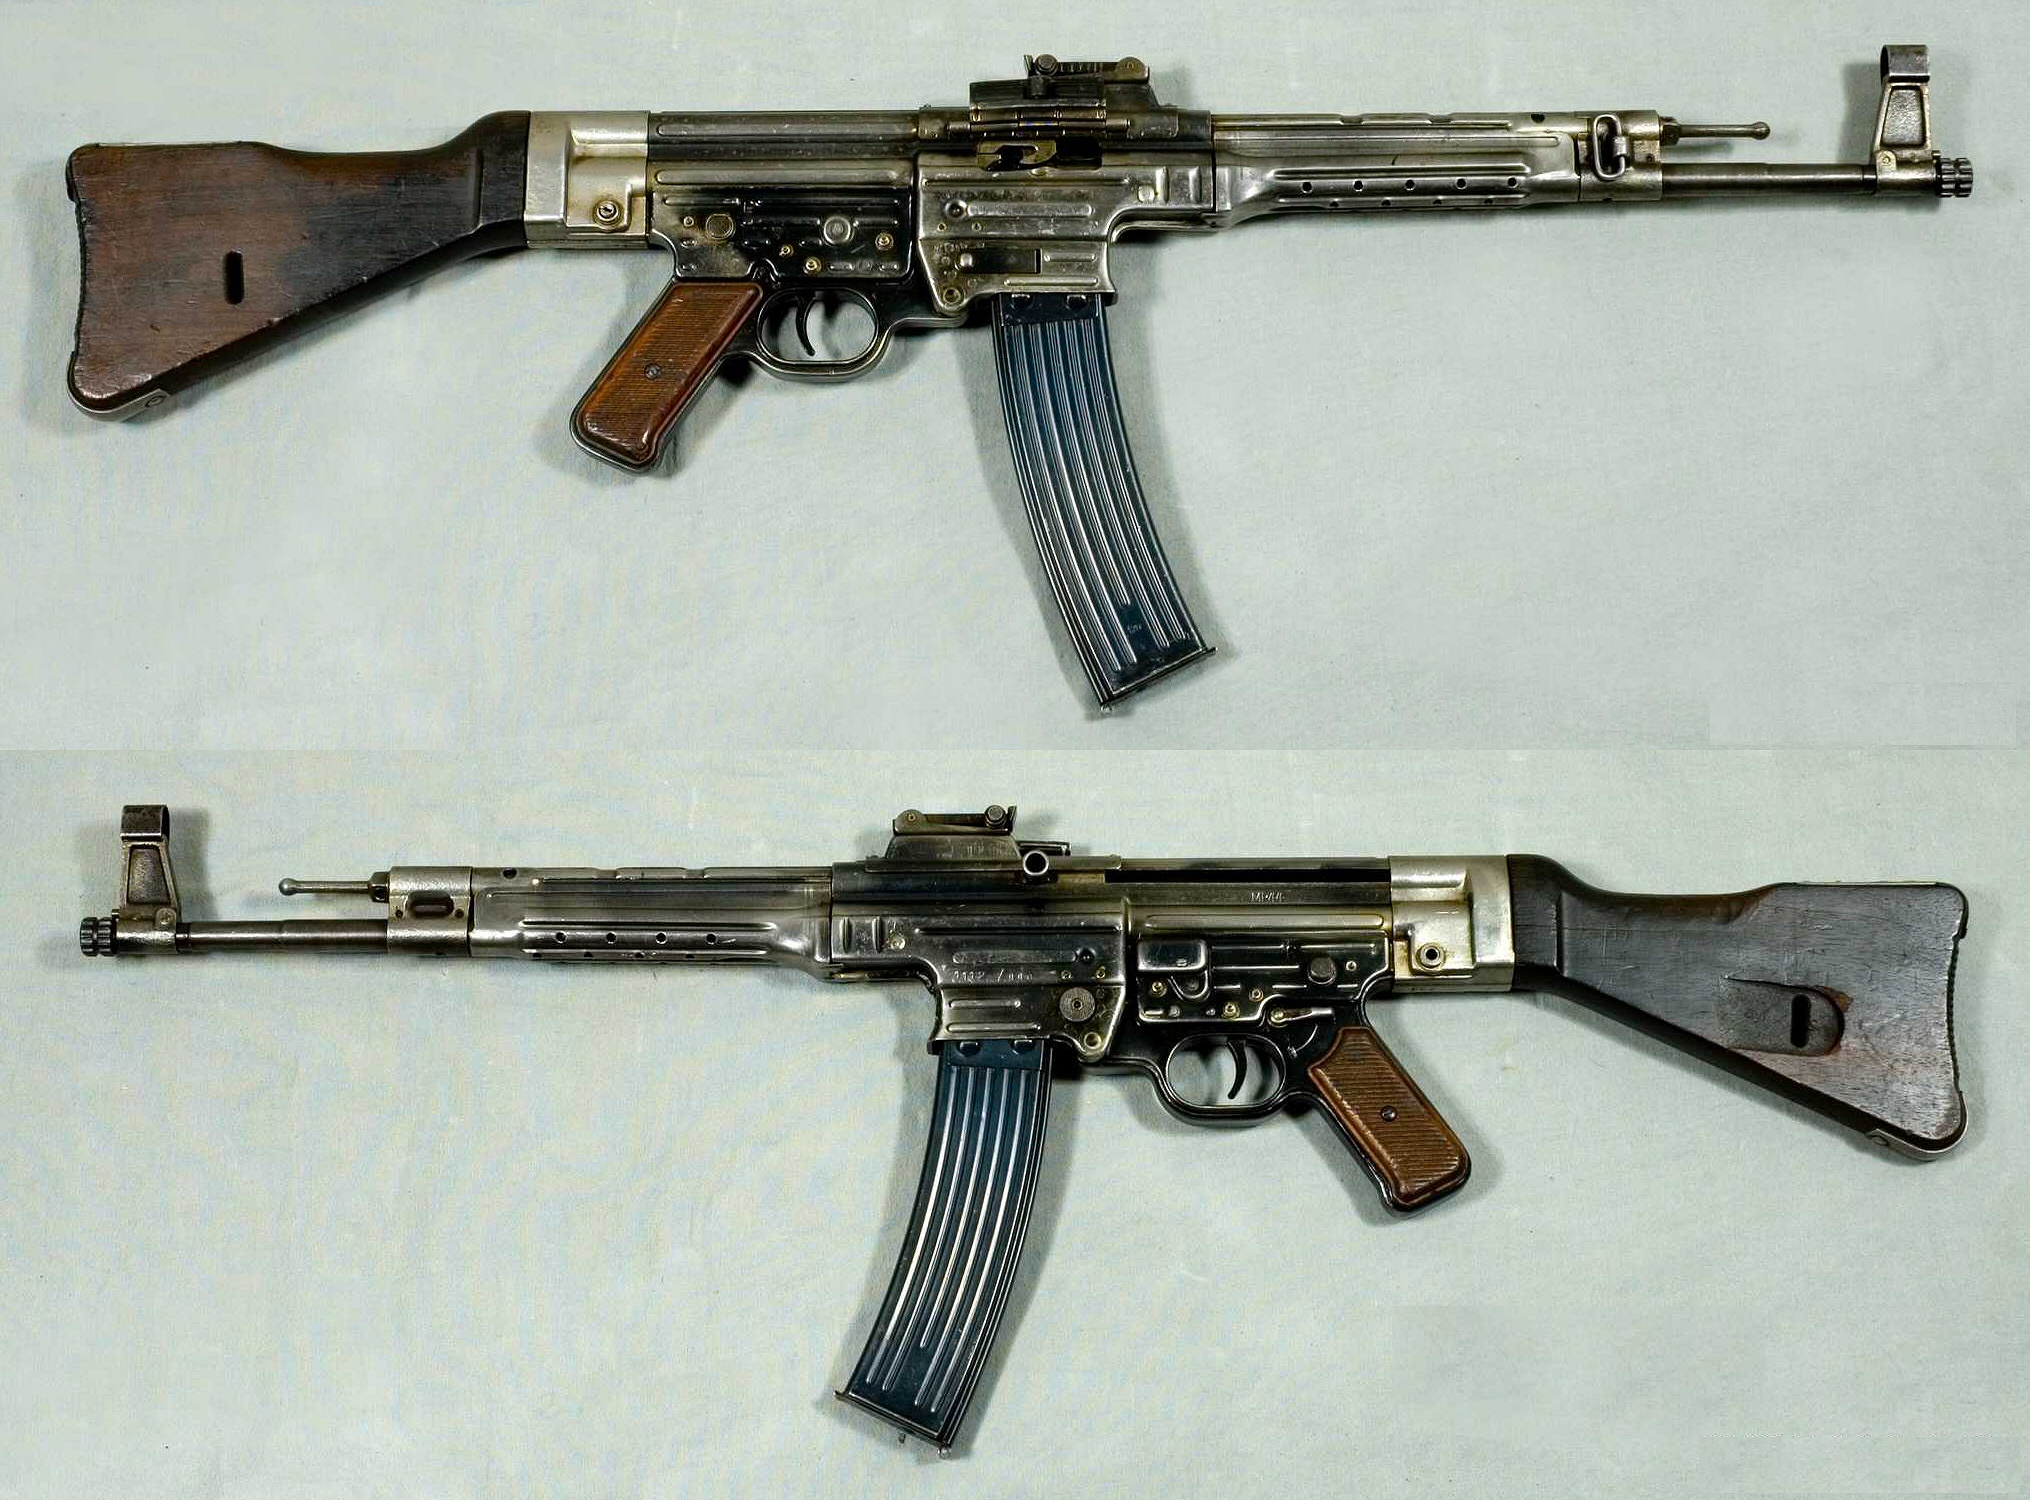 MP44 (Sturmgewehr 44). From the collections of Armémuseum (Swedish Army Museum), Stockholm. / Public domain